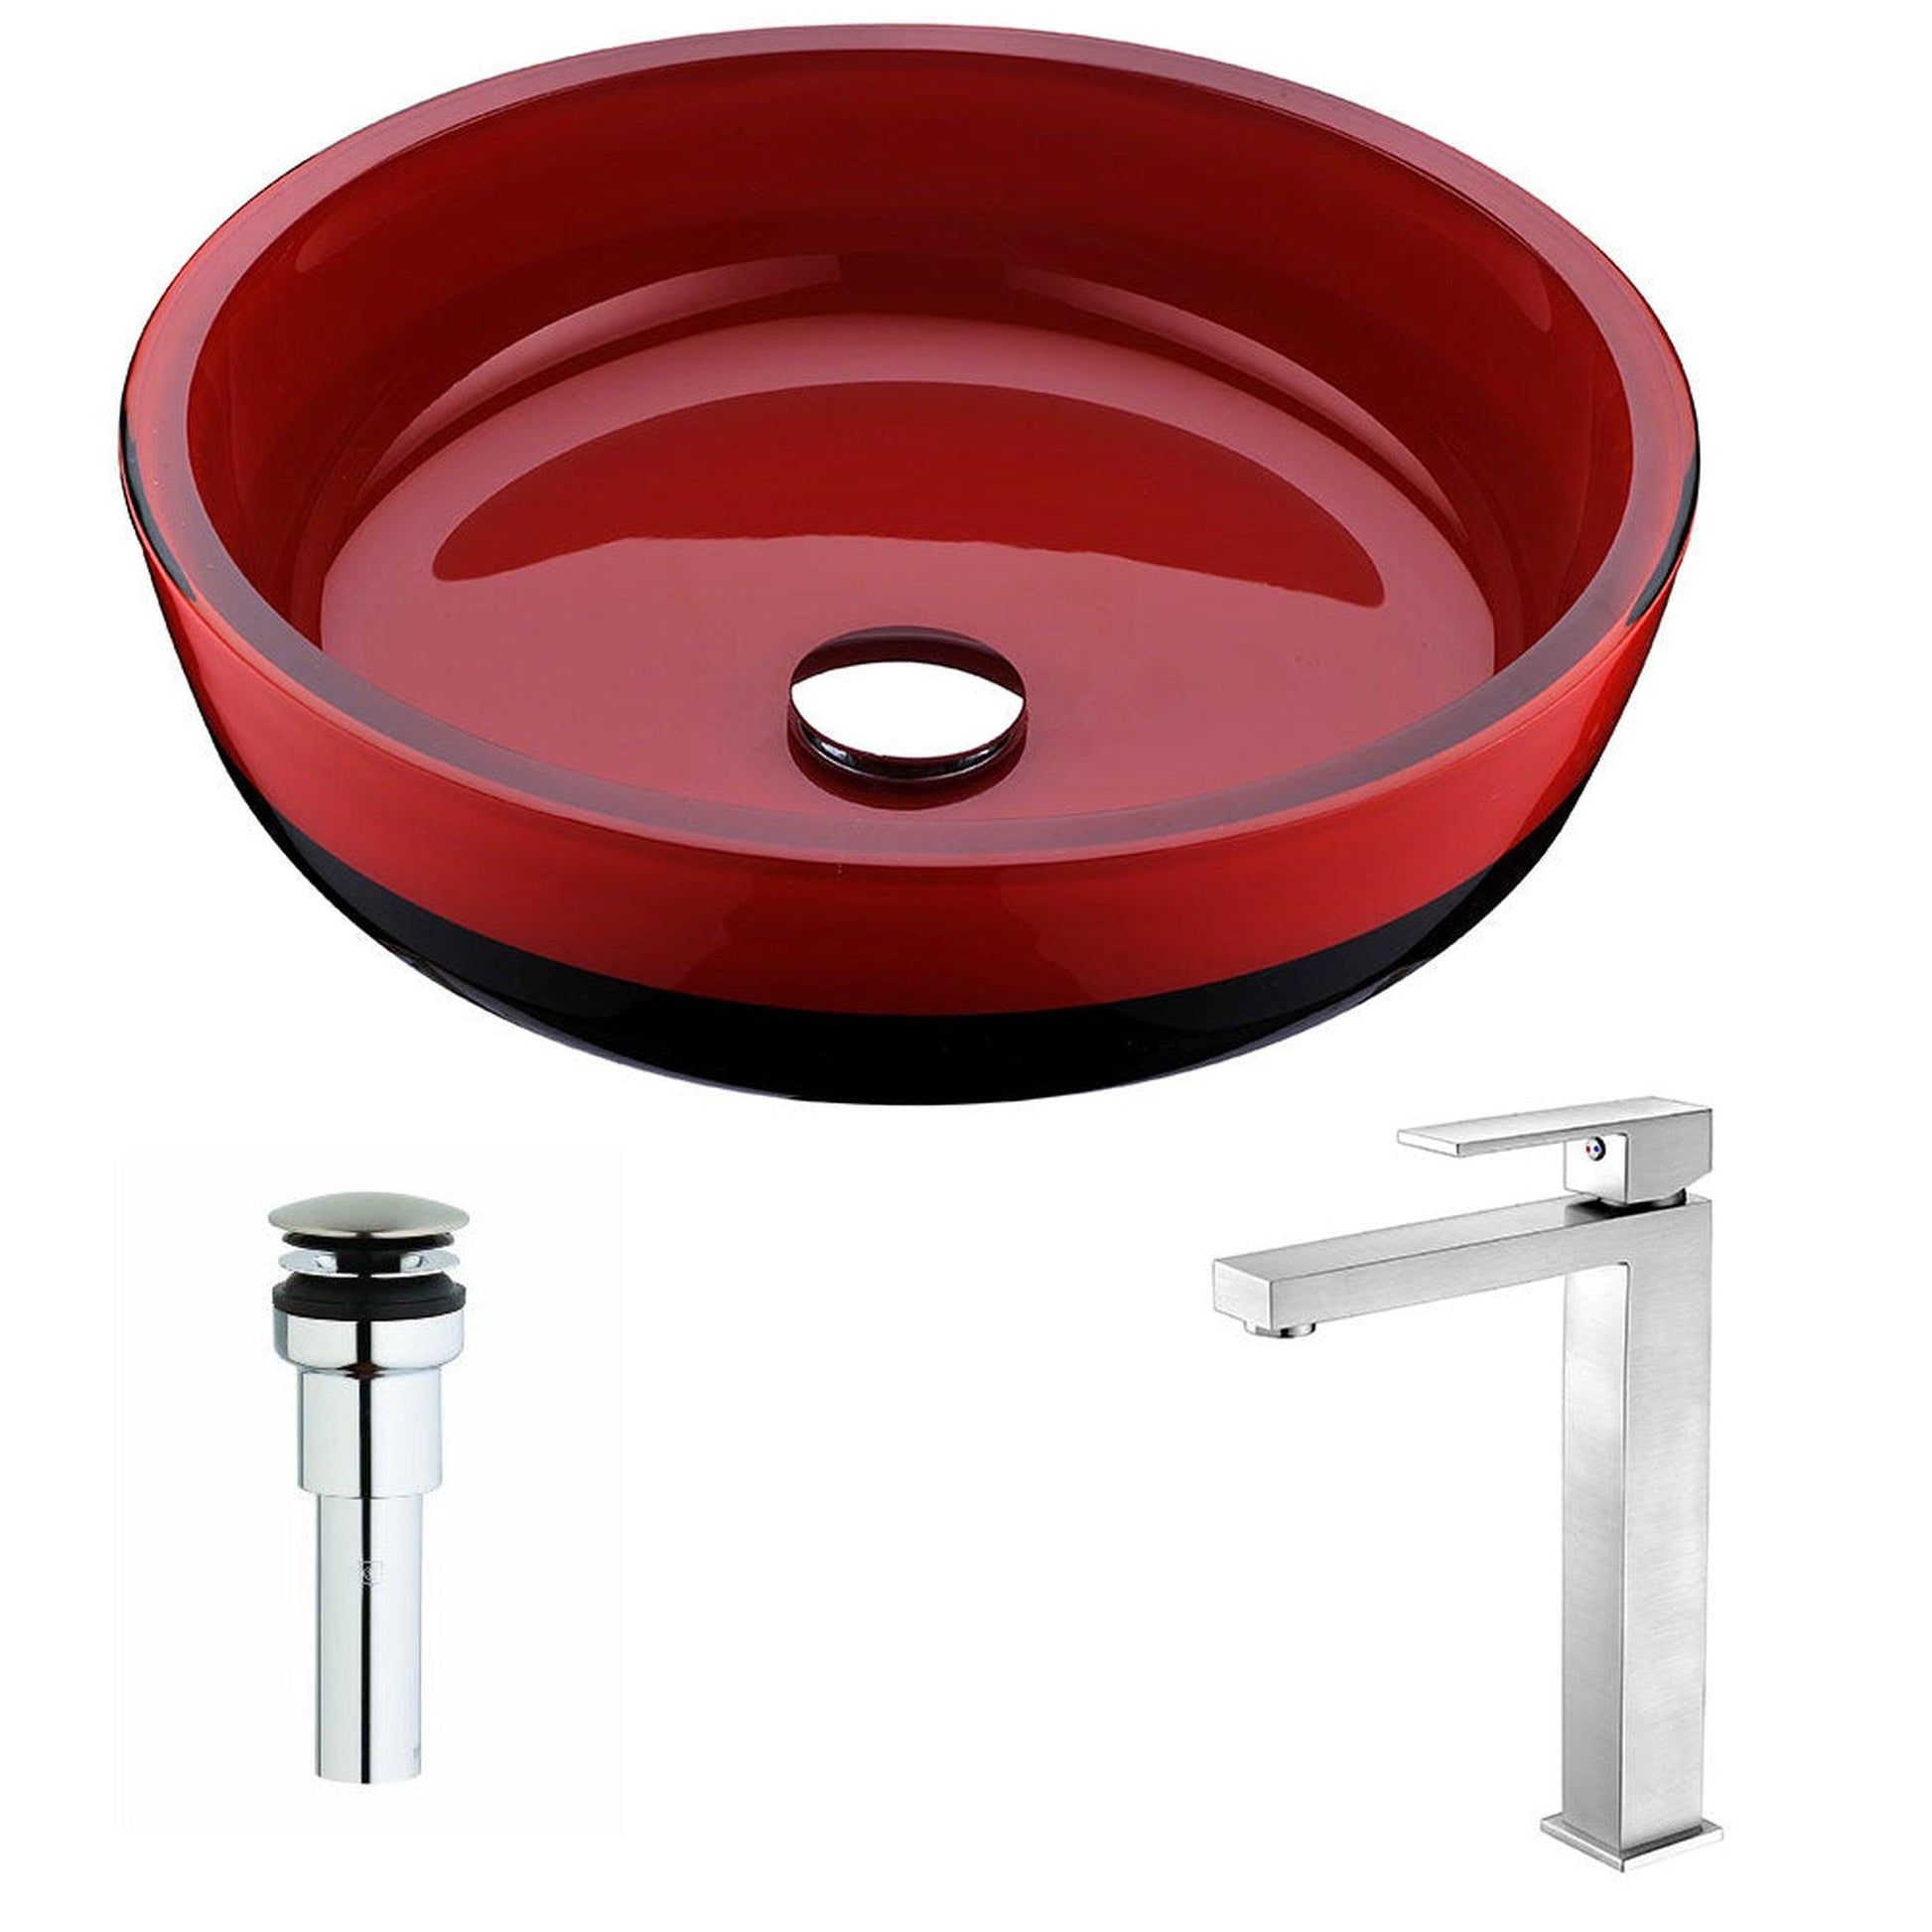 ANZZI Schnell Series 17" x 17" Cylinder Shape Lustrous Red and Black Vessel Sink With Chrome Pop-Up Drain and Brushed Nickel Enti Faucet